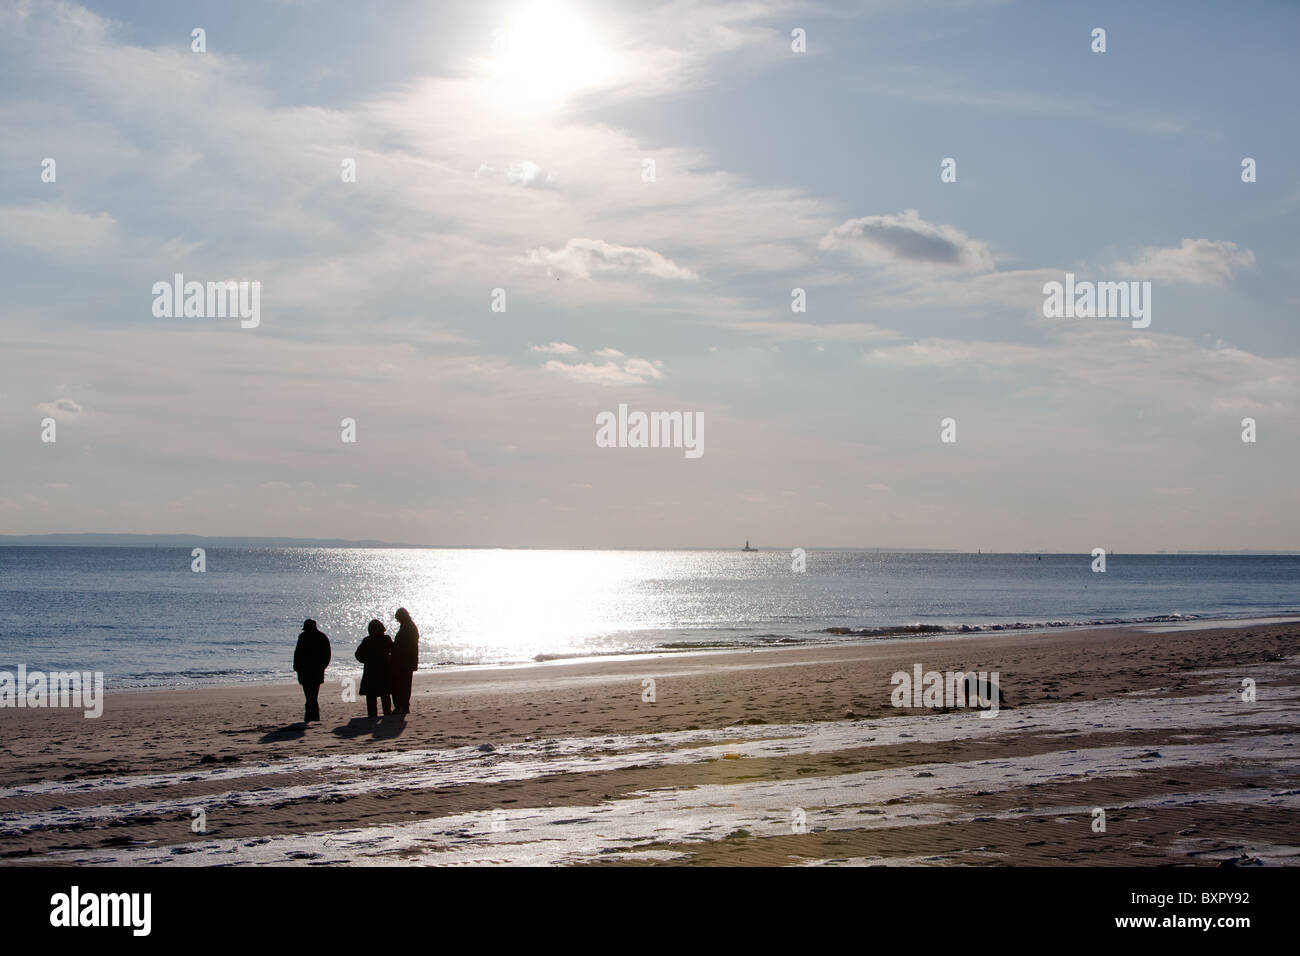 silhouette, beach, landscape, icy landscape with people Stock Photo